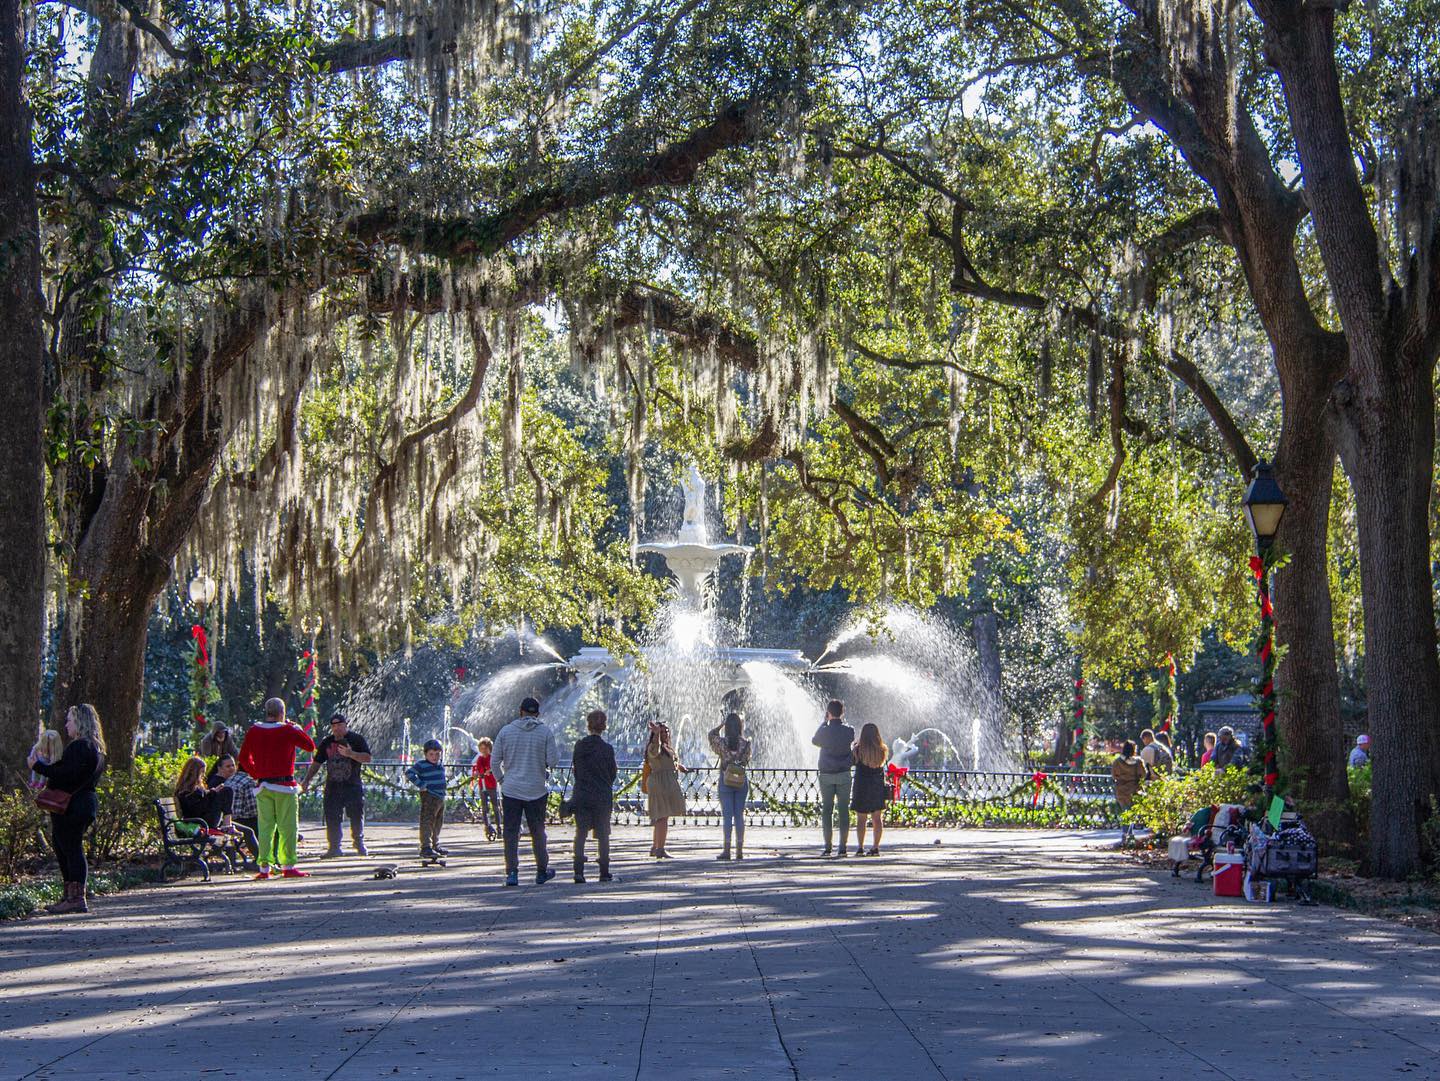 People gathering at the Forsyth Park Fountain in Savannah. 

#savannah #savannahgeorgia #visitsavannah #forsythpark #forsythfountain #forsythparkfountain #savannahsquares #vacation #travelphotography